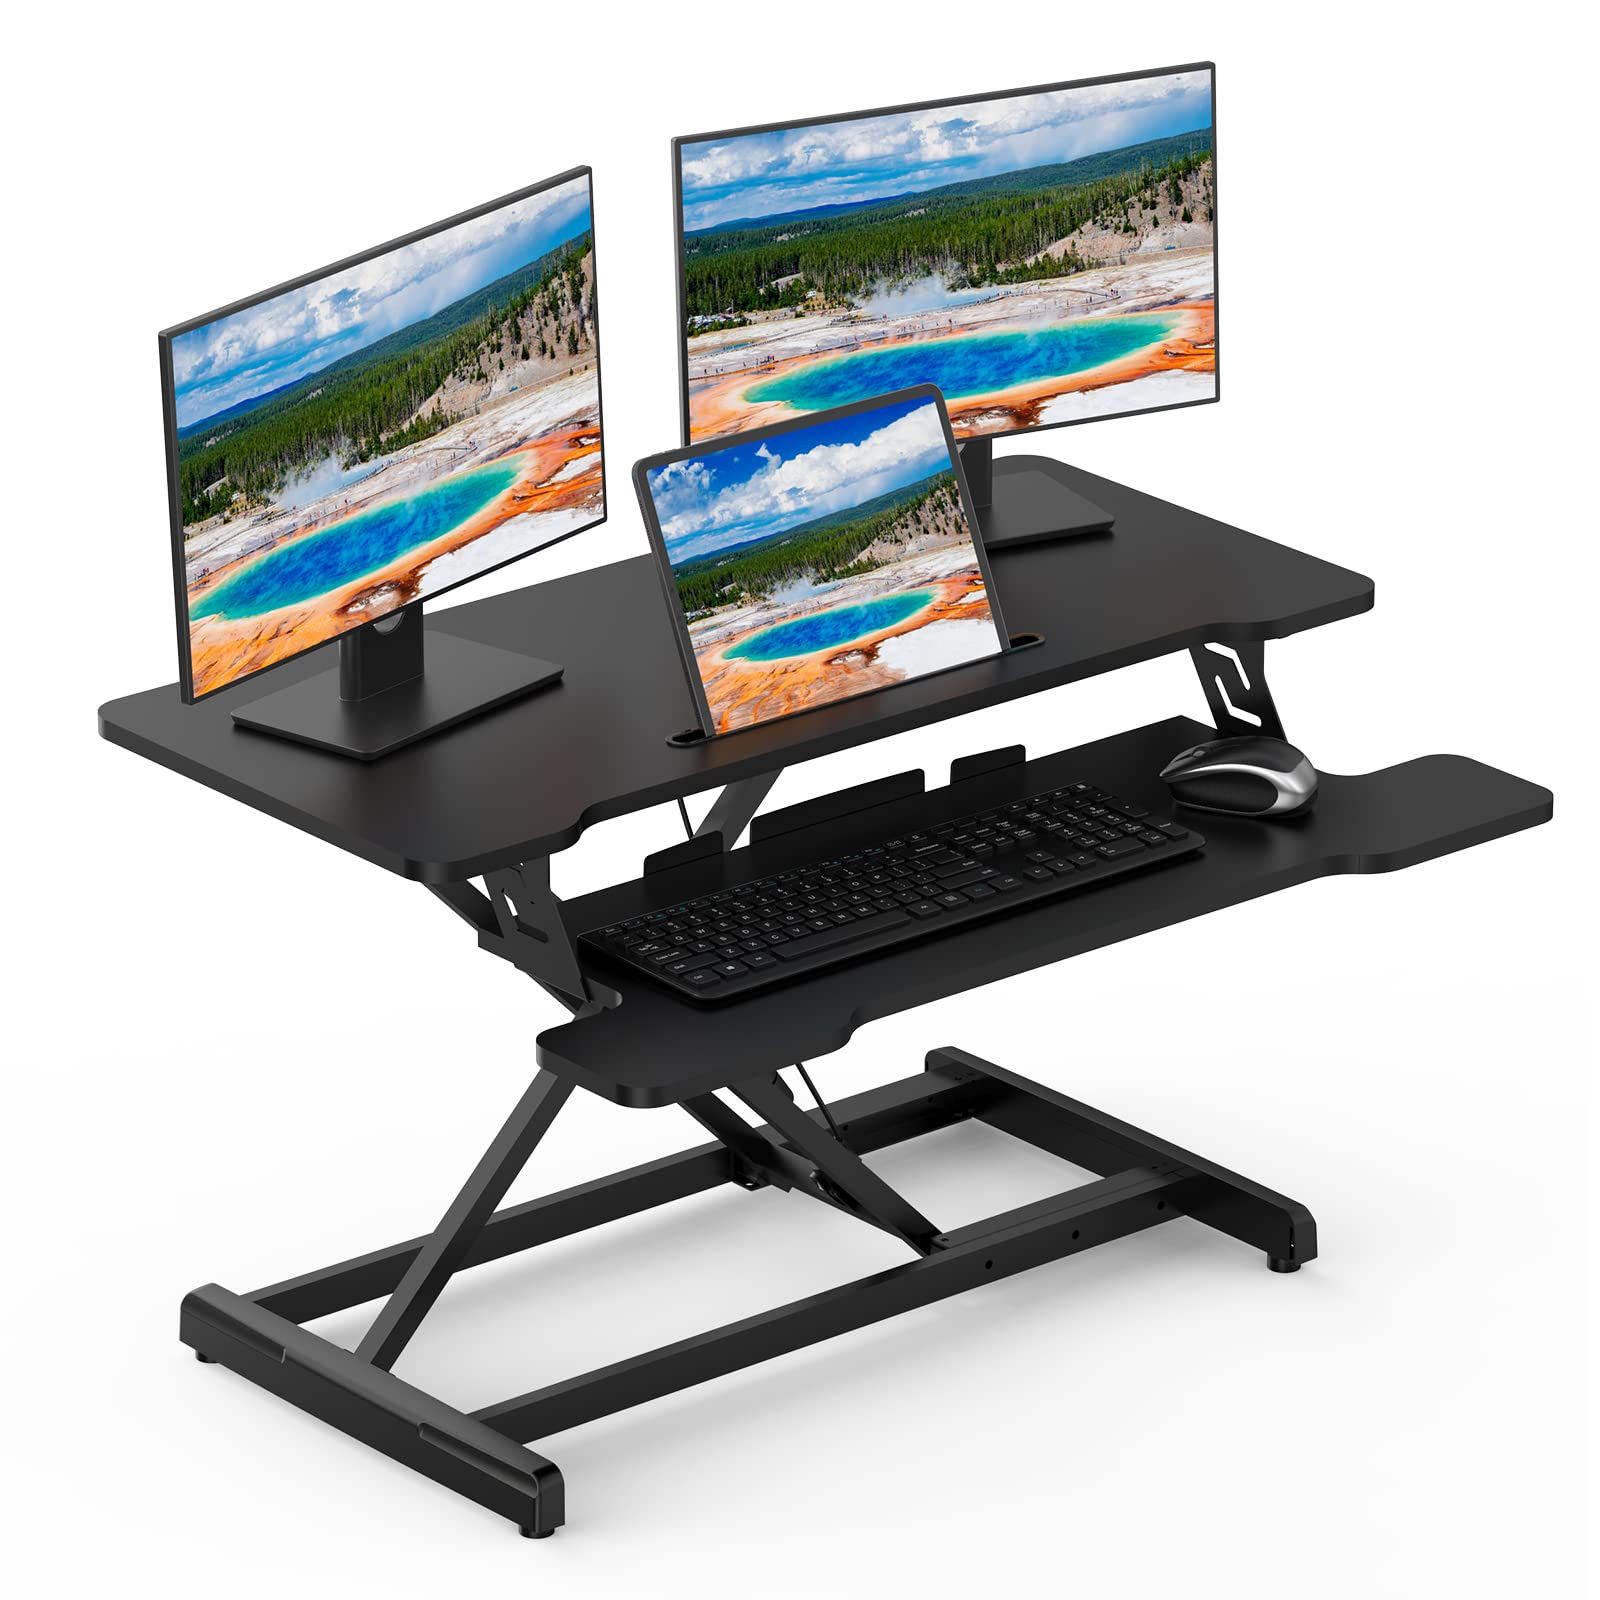 Standing Desk Converter - 35''Wide Stand Up Desk Converter For Dual Monitor & Laptop W/Keyboard Tray,Sit To Stand Ergonomic Height Adjustable Riser Co